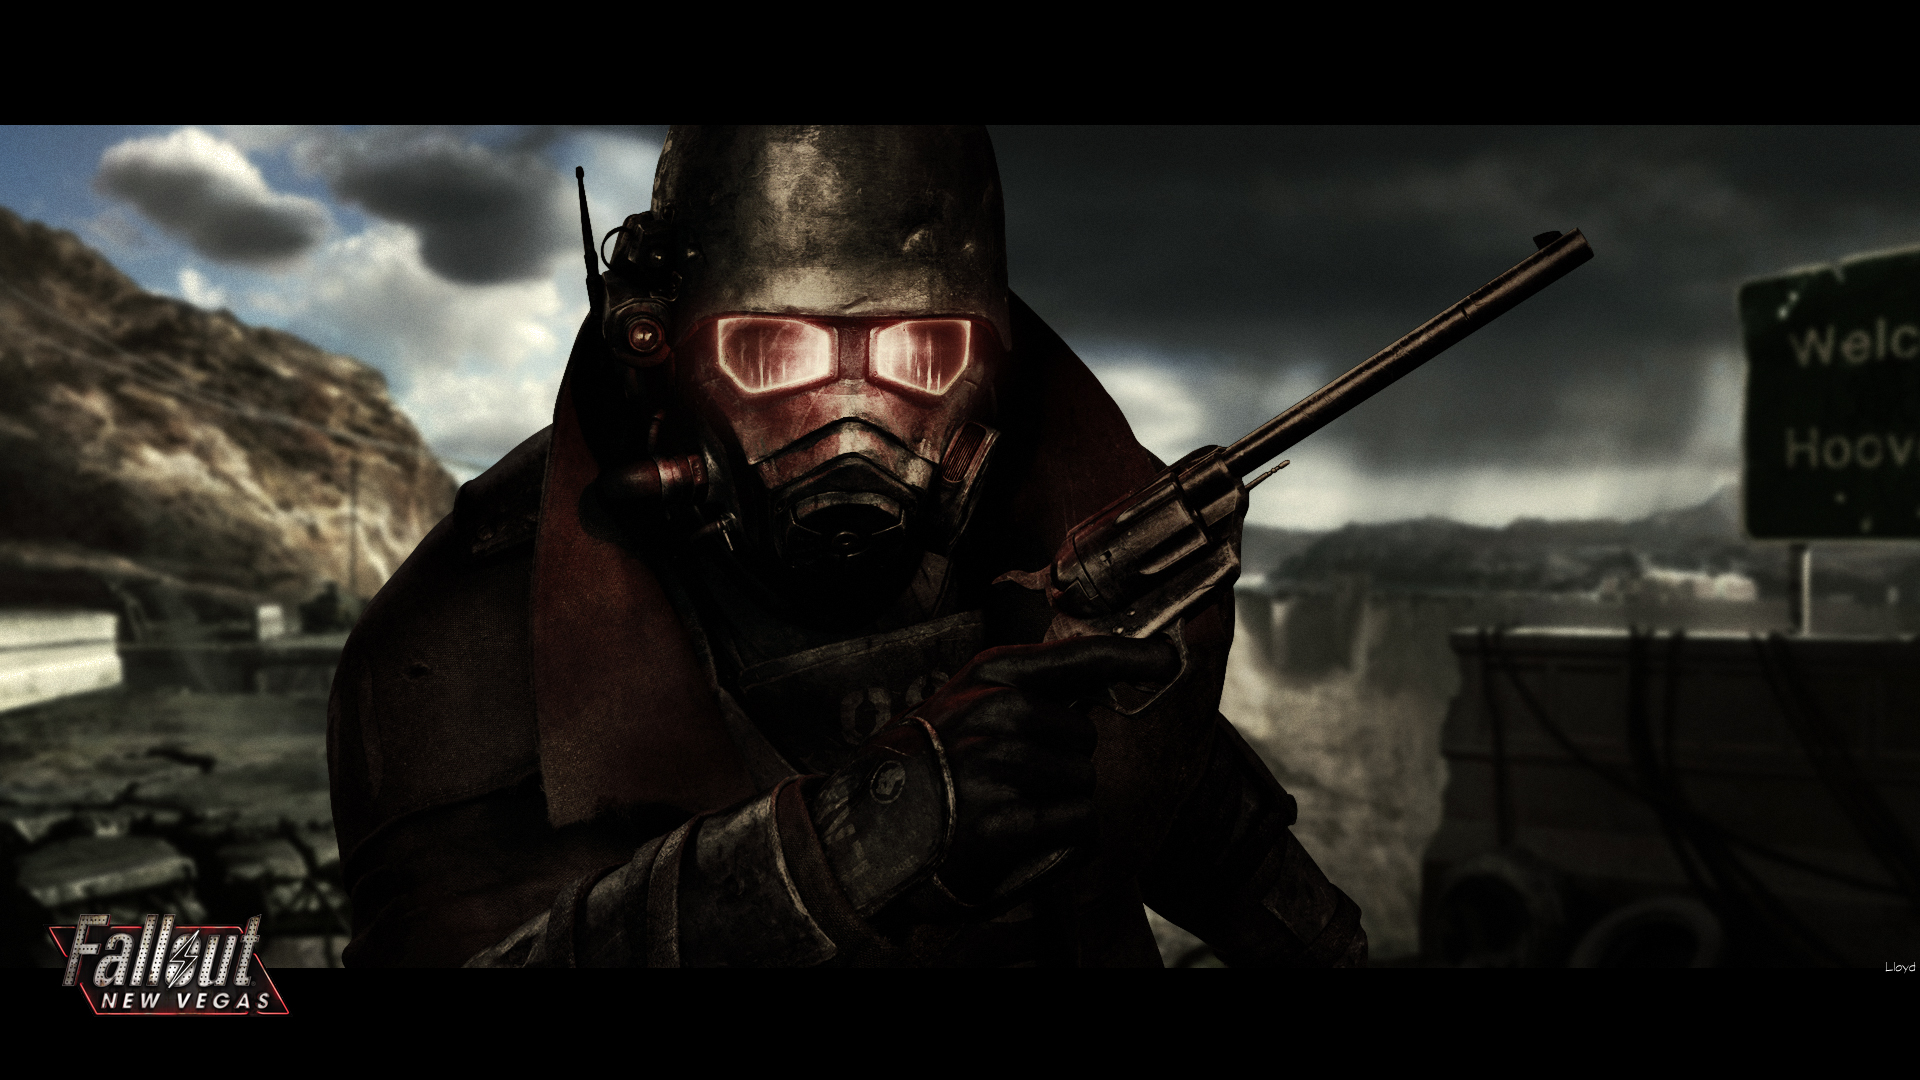 Fallout New Vegas Art HD Wallpaper For Your Desktop Background Or